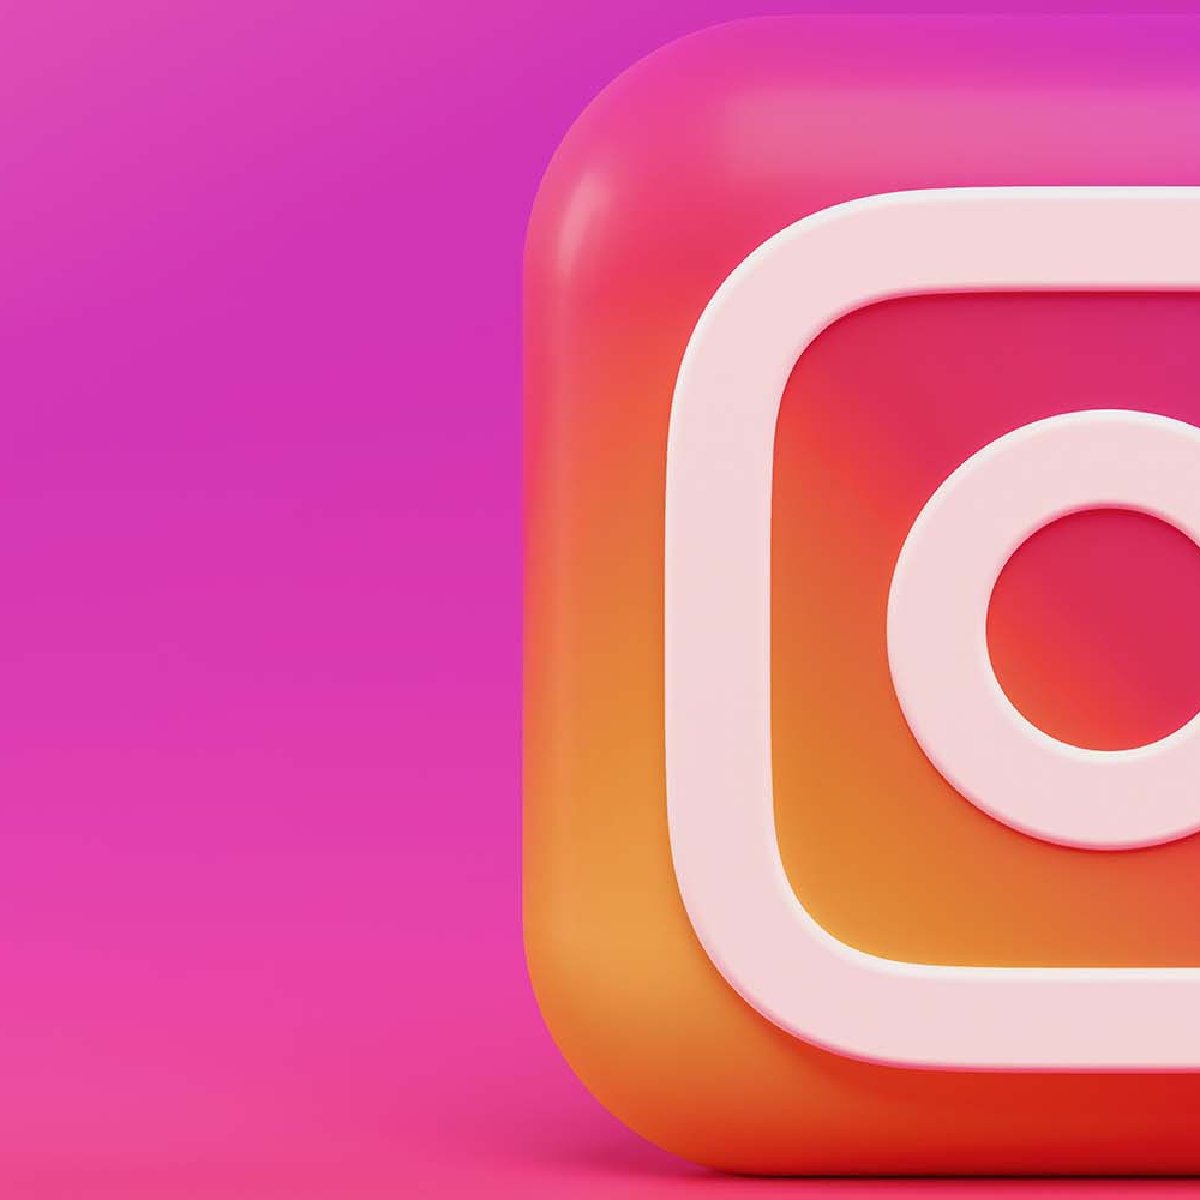 How do I Create an Instagram Account without Facebook - H2S Media